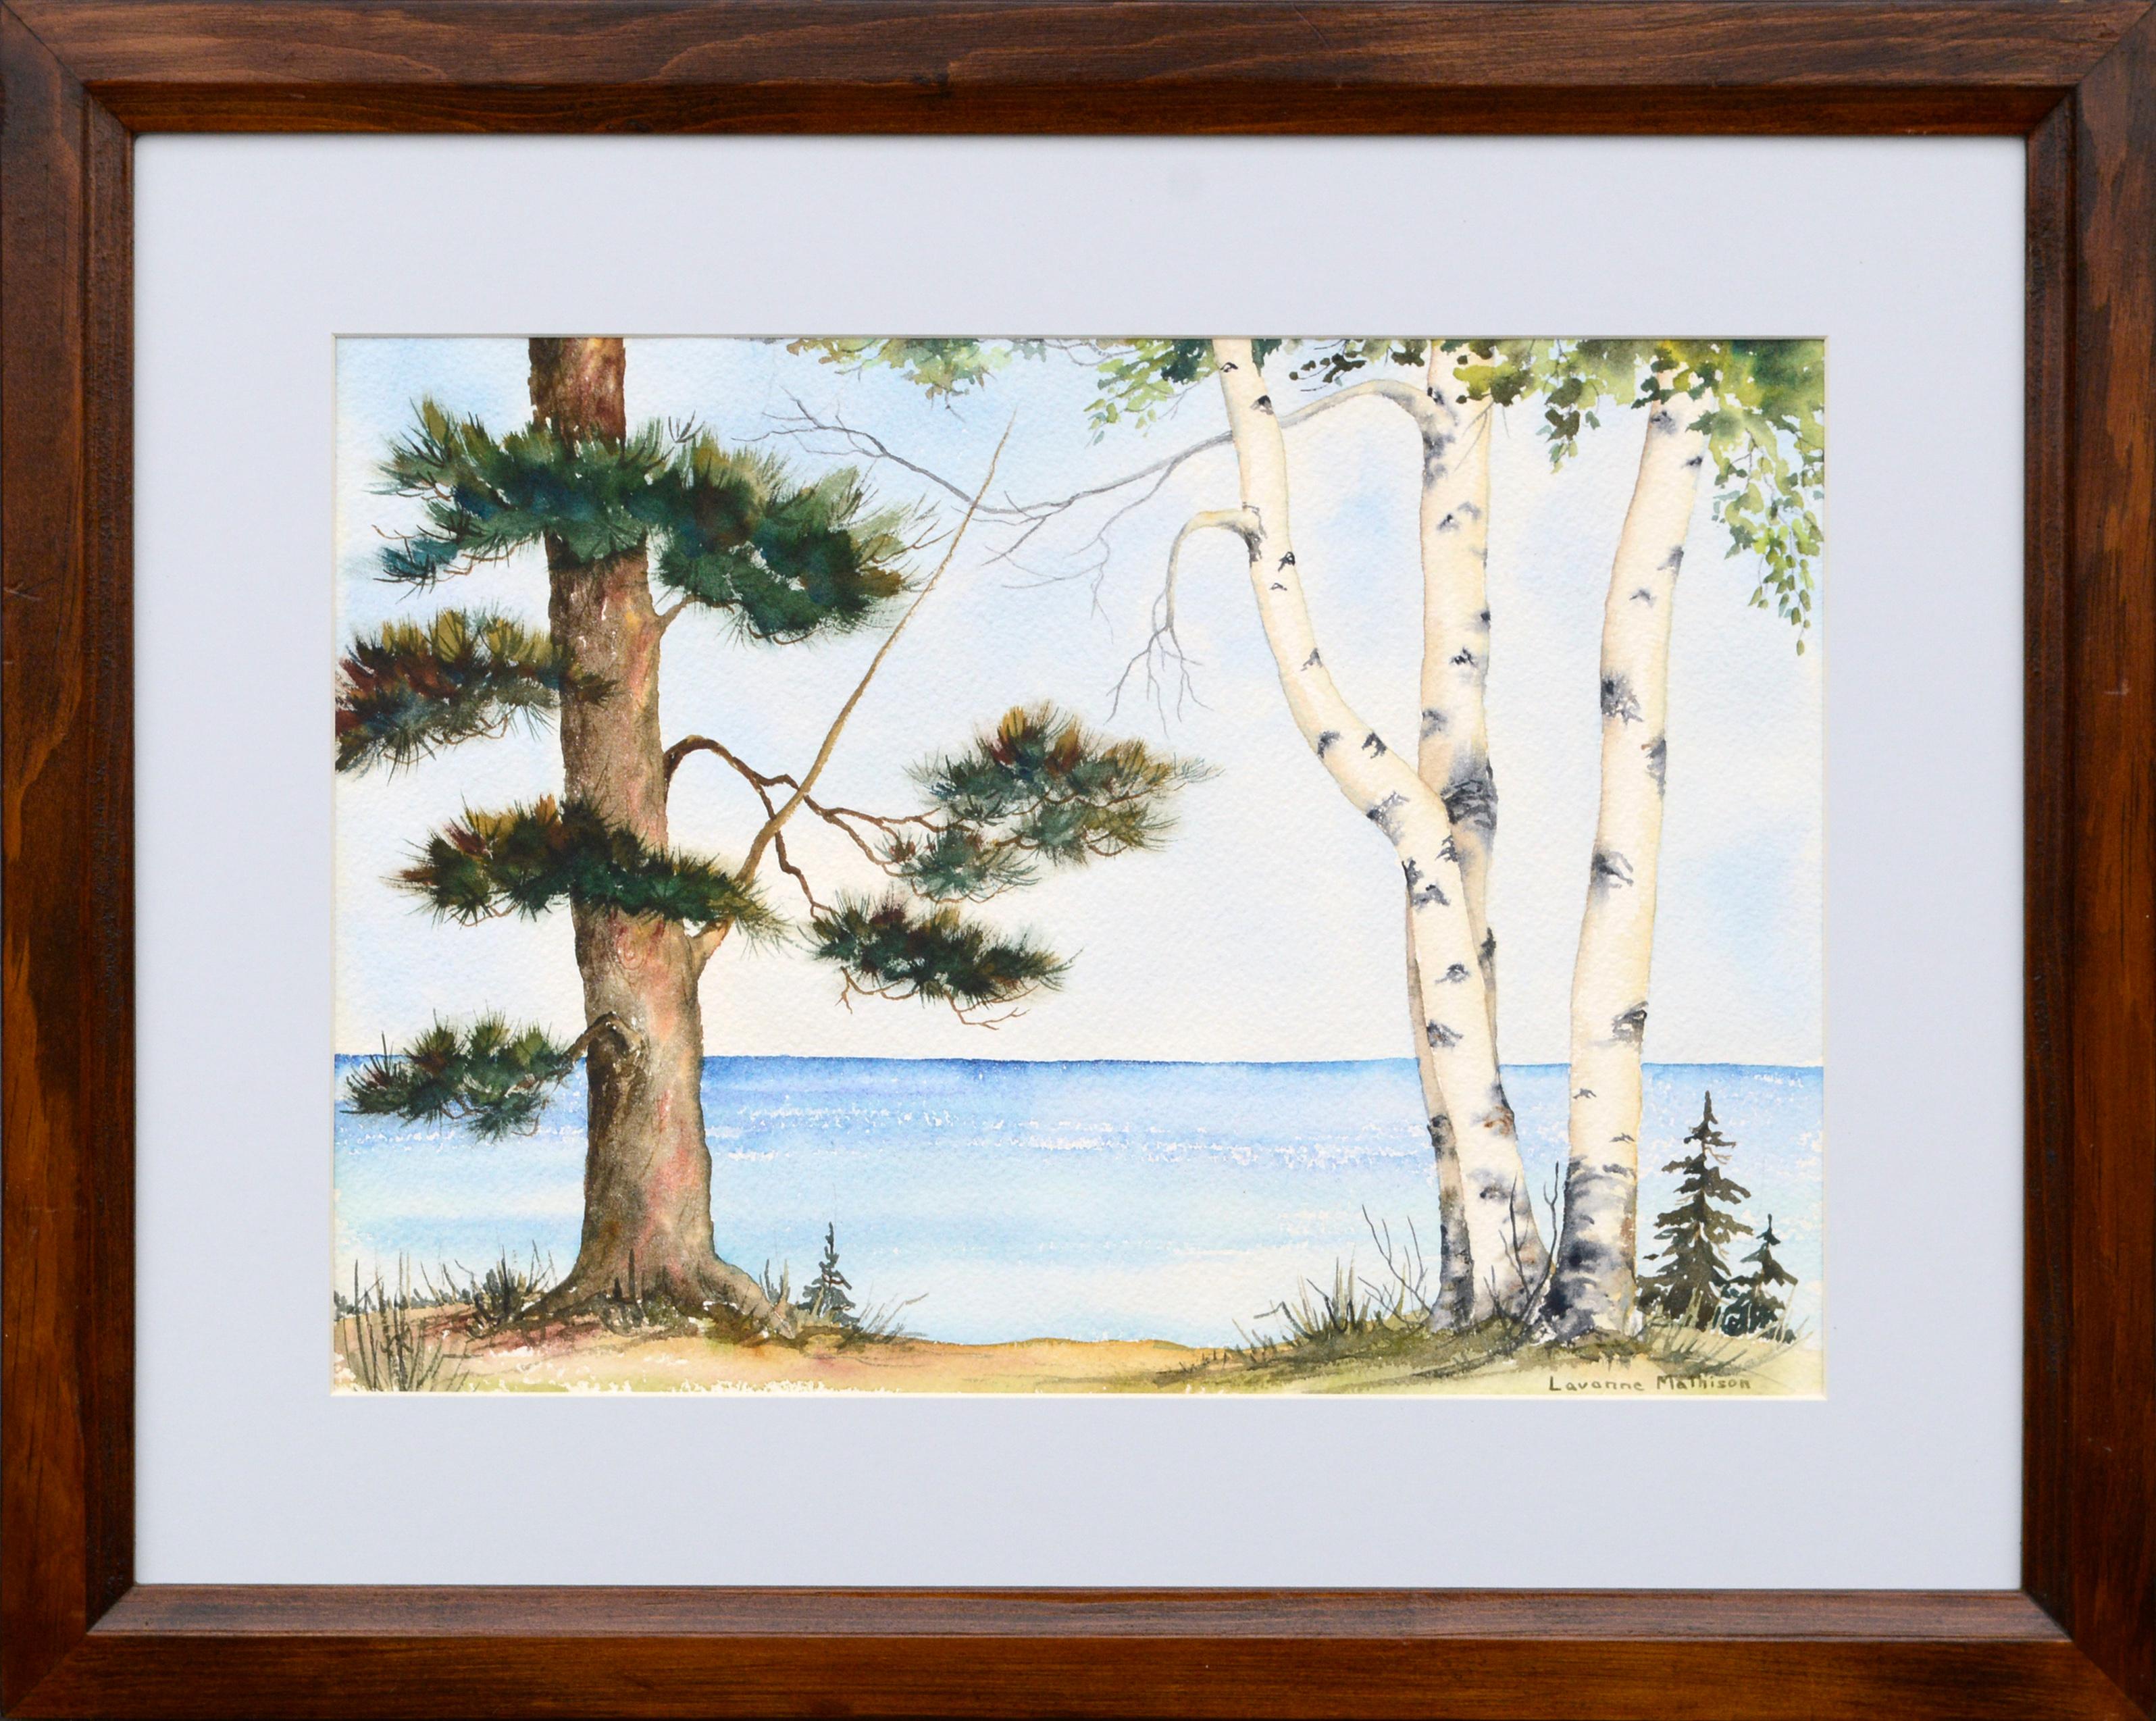 Lavonne Mathison Landscape Painting - Pine and Birch at the Edge of the Lake - Landscape